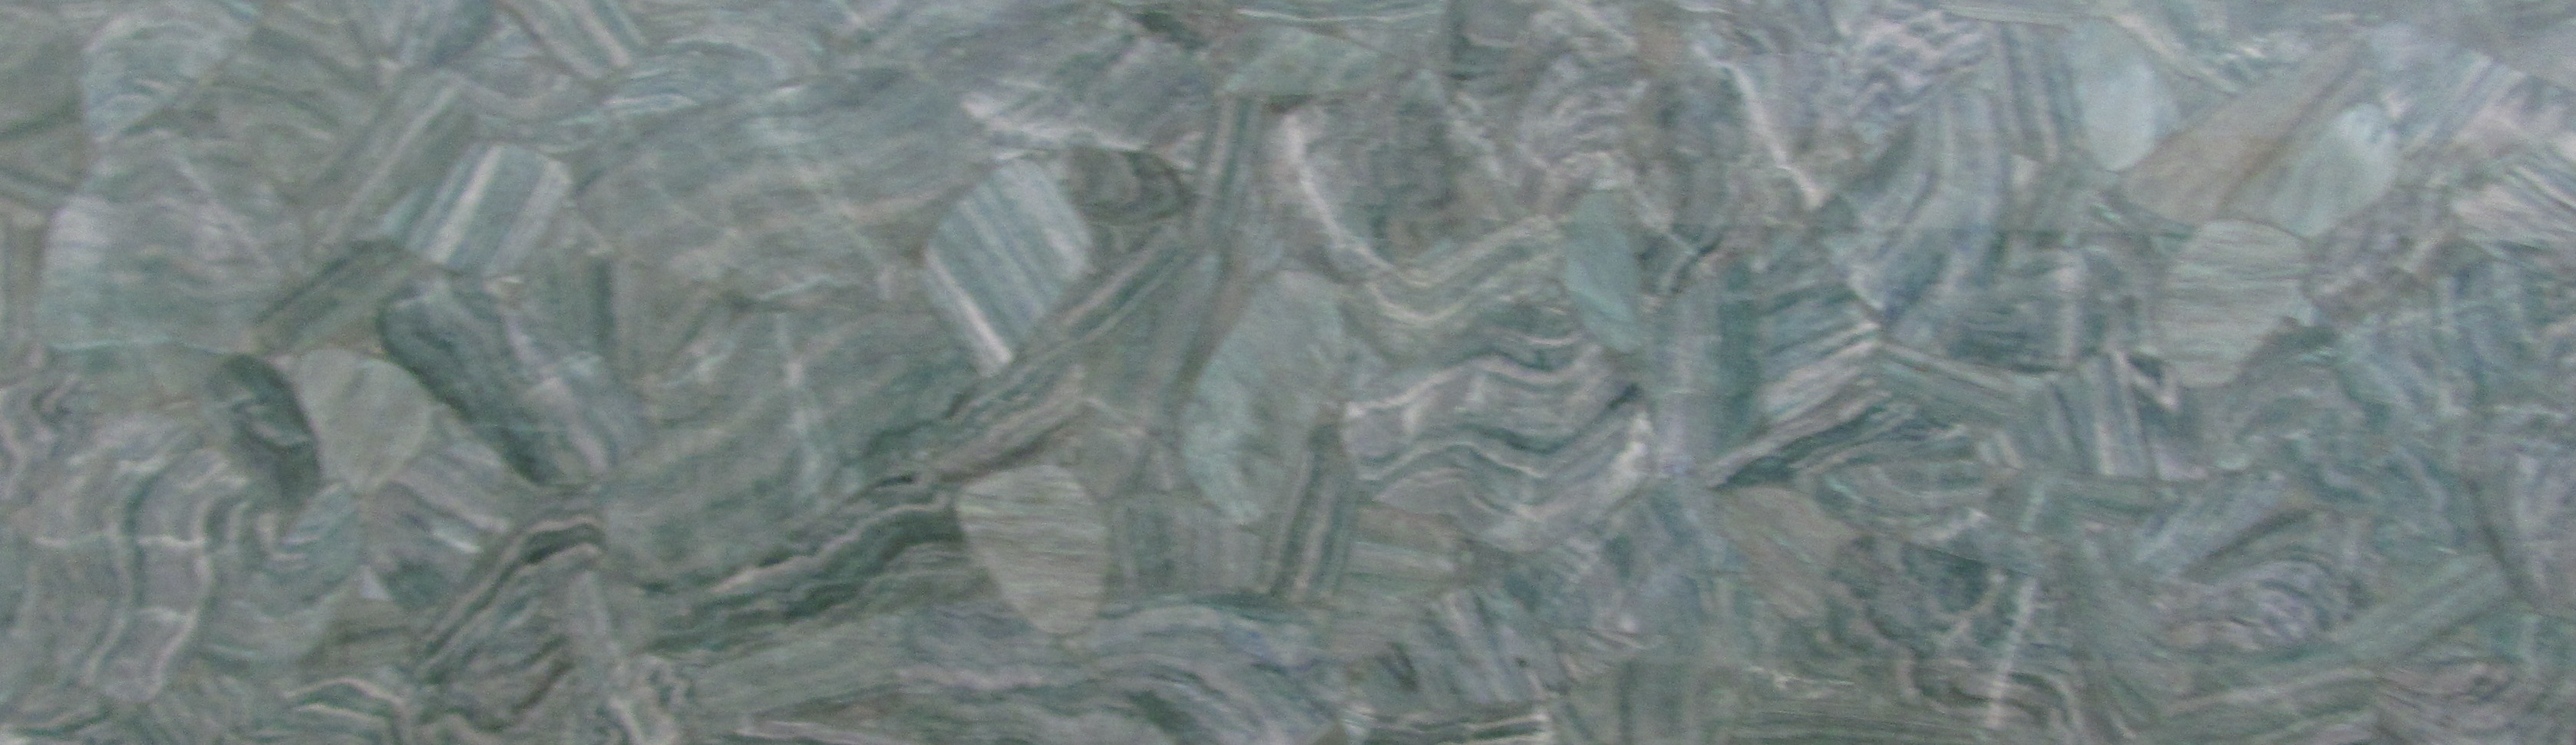 If you are looking for Crystal Quartz Slabs,Rose Quartz Slabs,Onyx Slabs,Quartz Slabs in India [Gujarat] Ahmedabad.